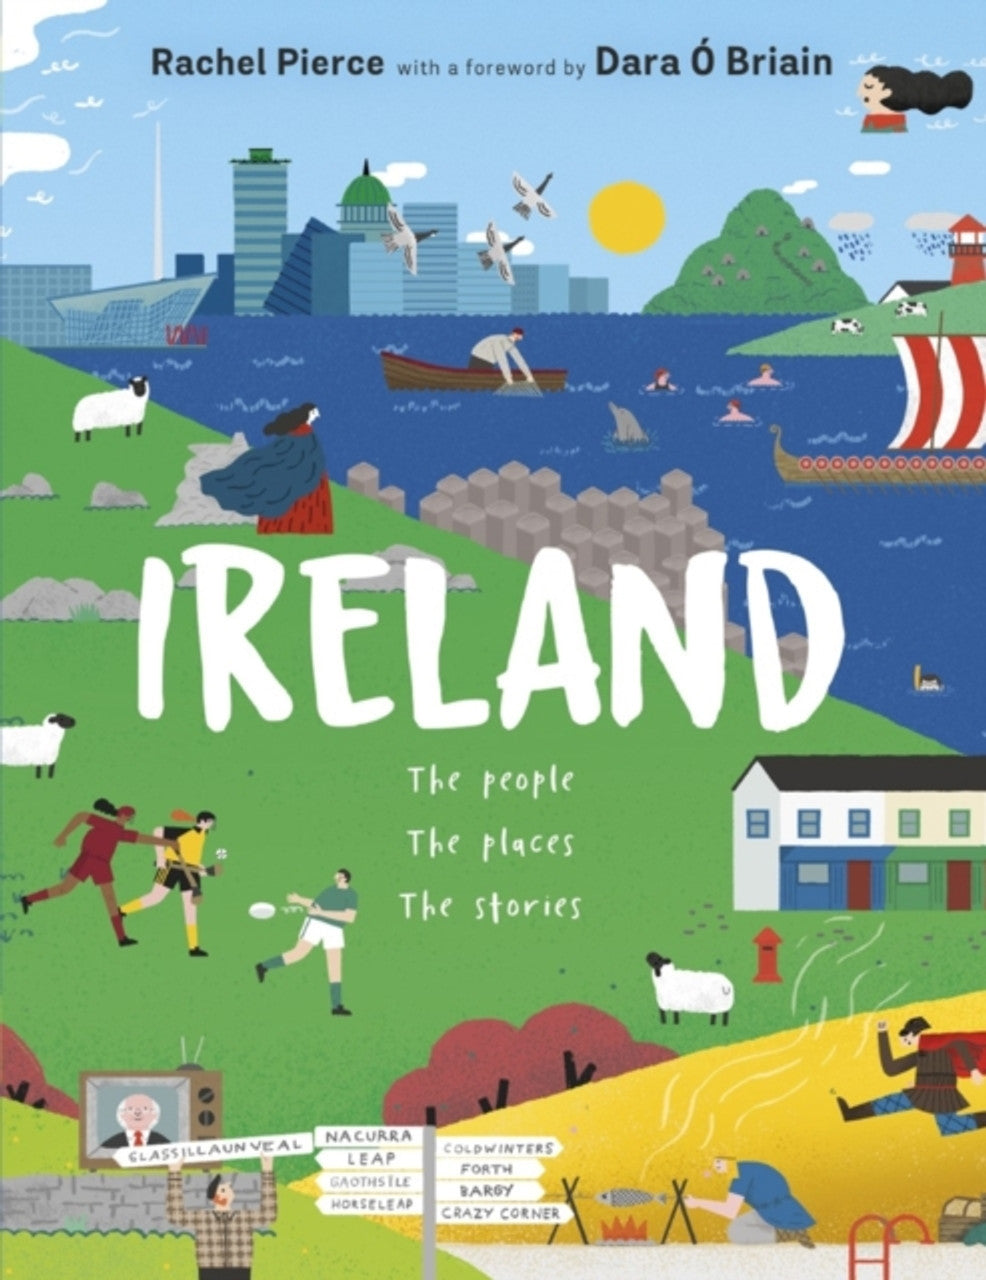 Ireland The People, The Places, The Stories by Rachel Pierce